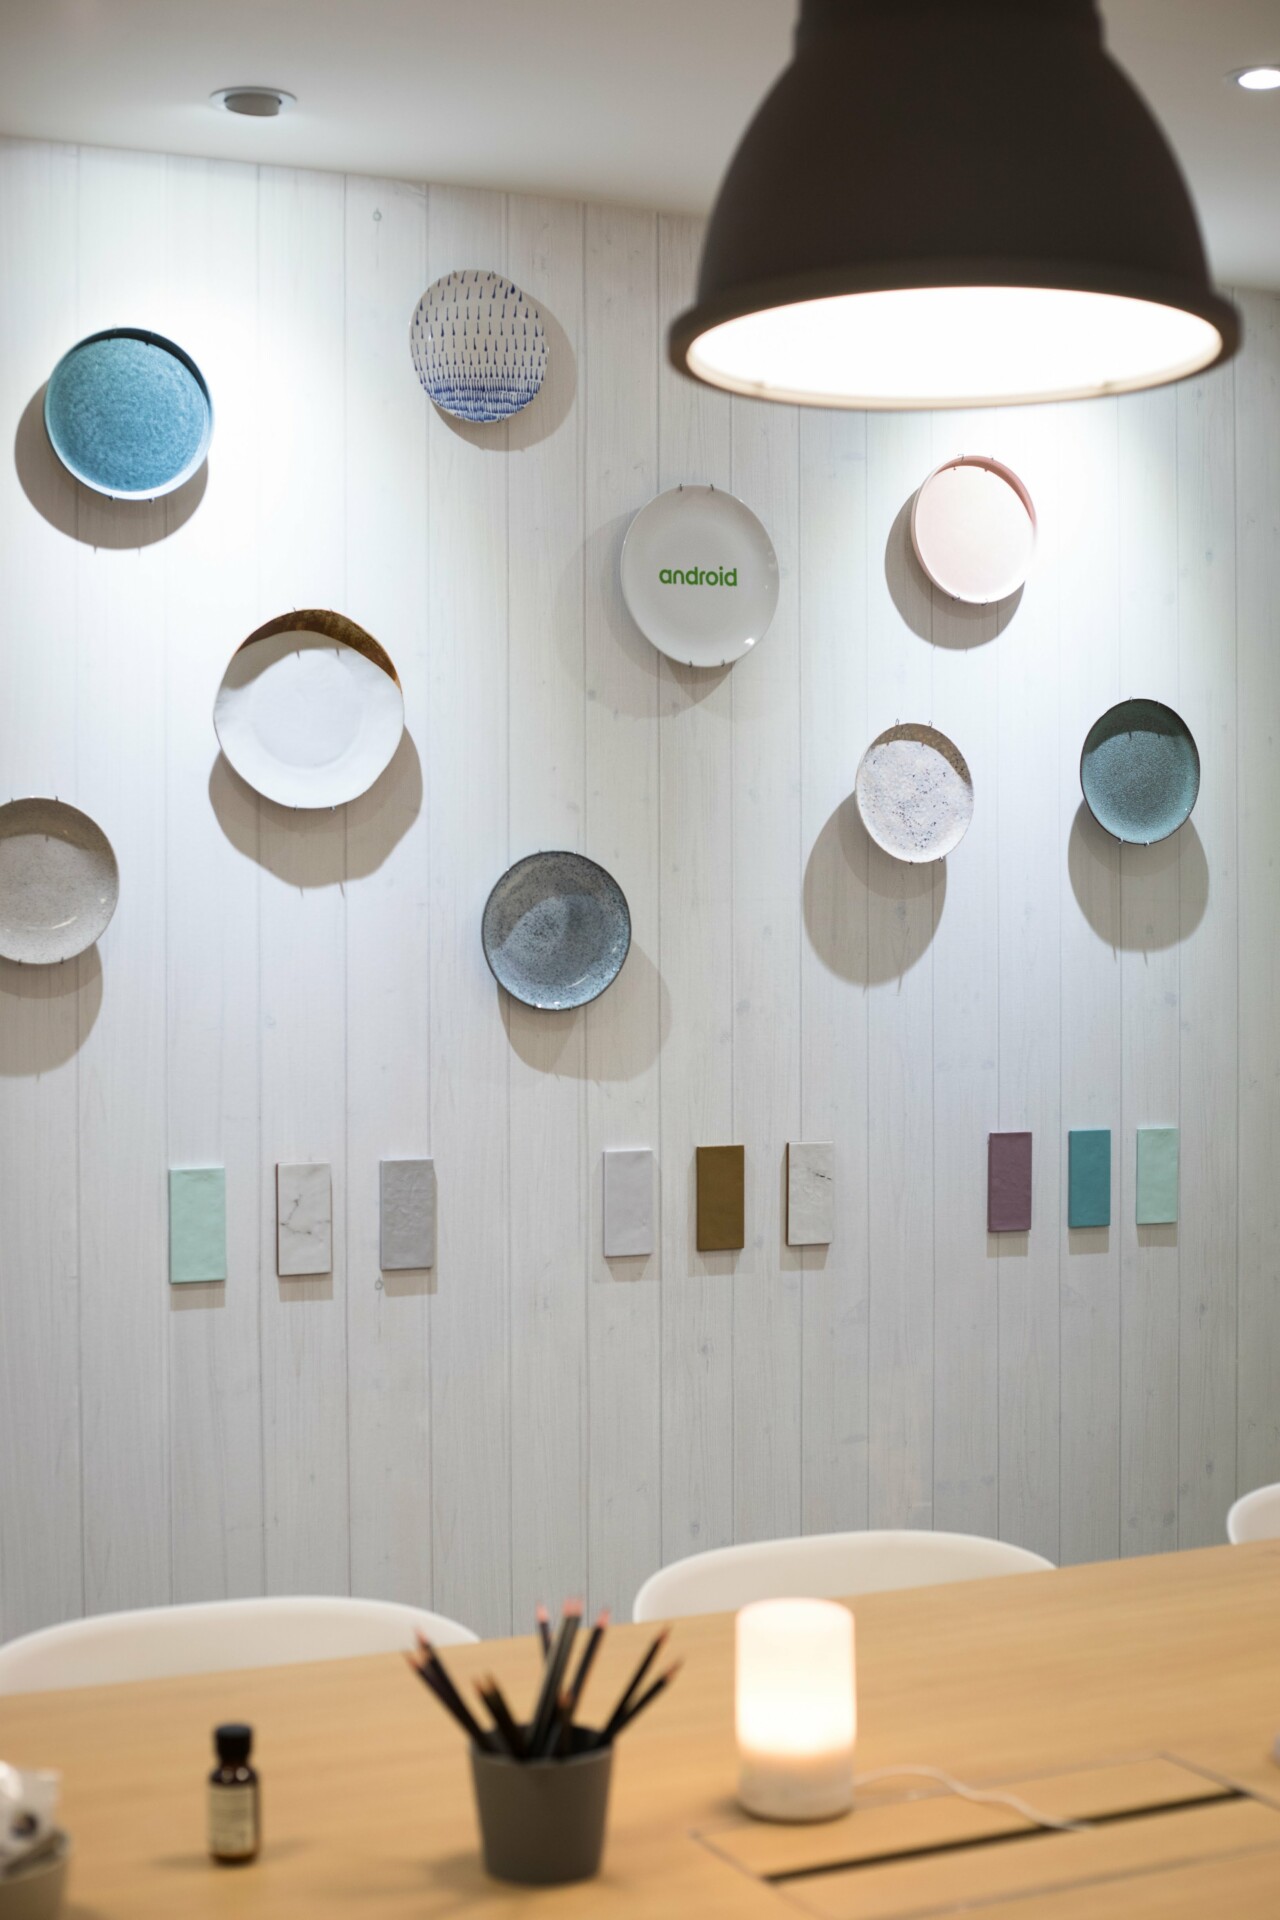 Android Plaza MWC 2019 ceramic workshop detail